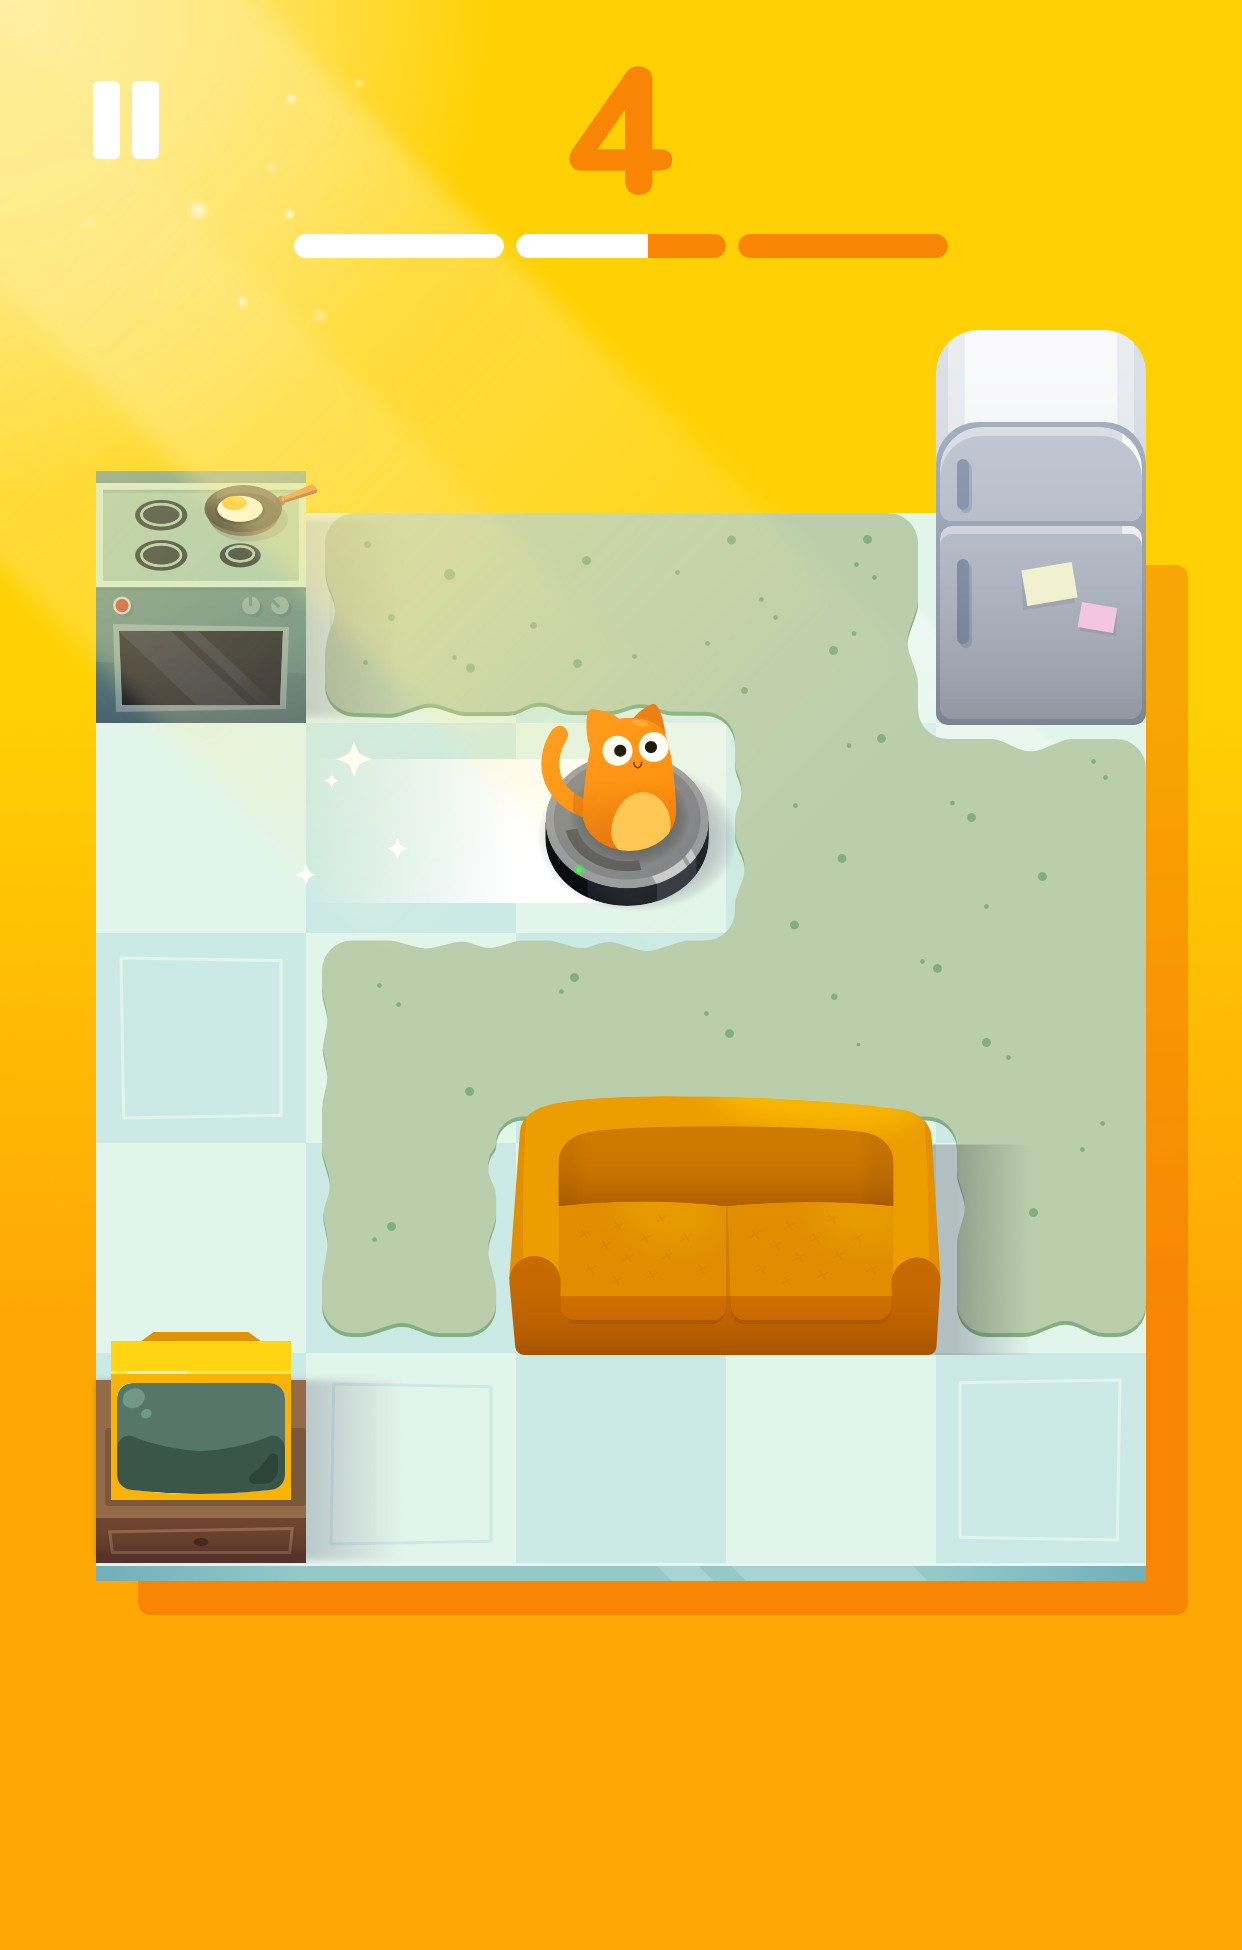 Screenshot from game Cat Vac, a cat on a Roomba cleaning the room